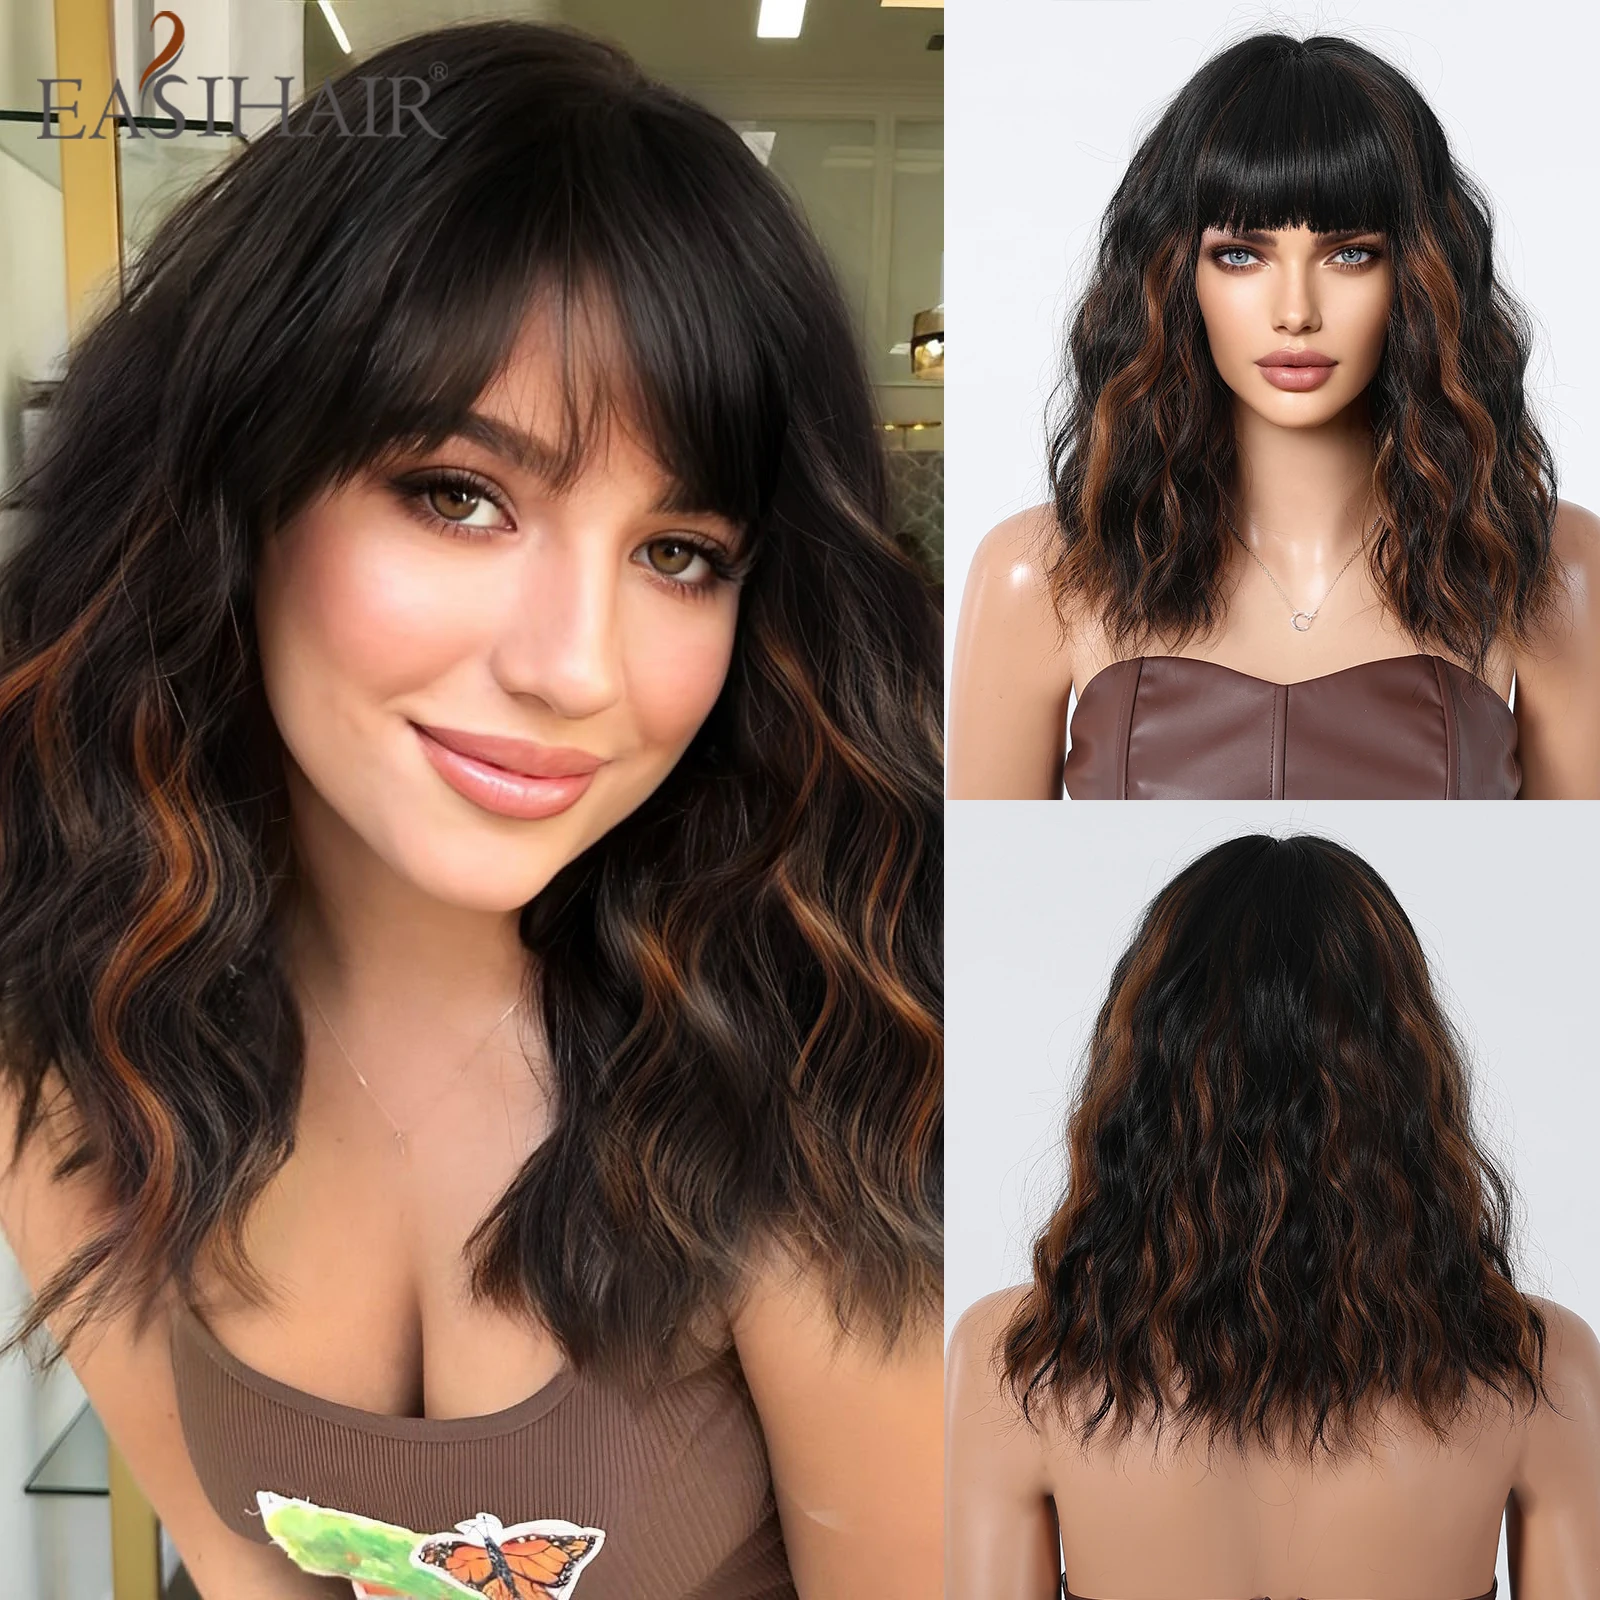 

EASIHAIR Black Mixed Brown Highlights Wigs With Bangs Short Bob Synthetic Wig for Women Natural Wave Curly Wig Heat Resistant